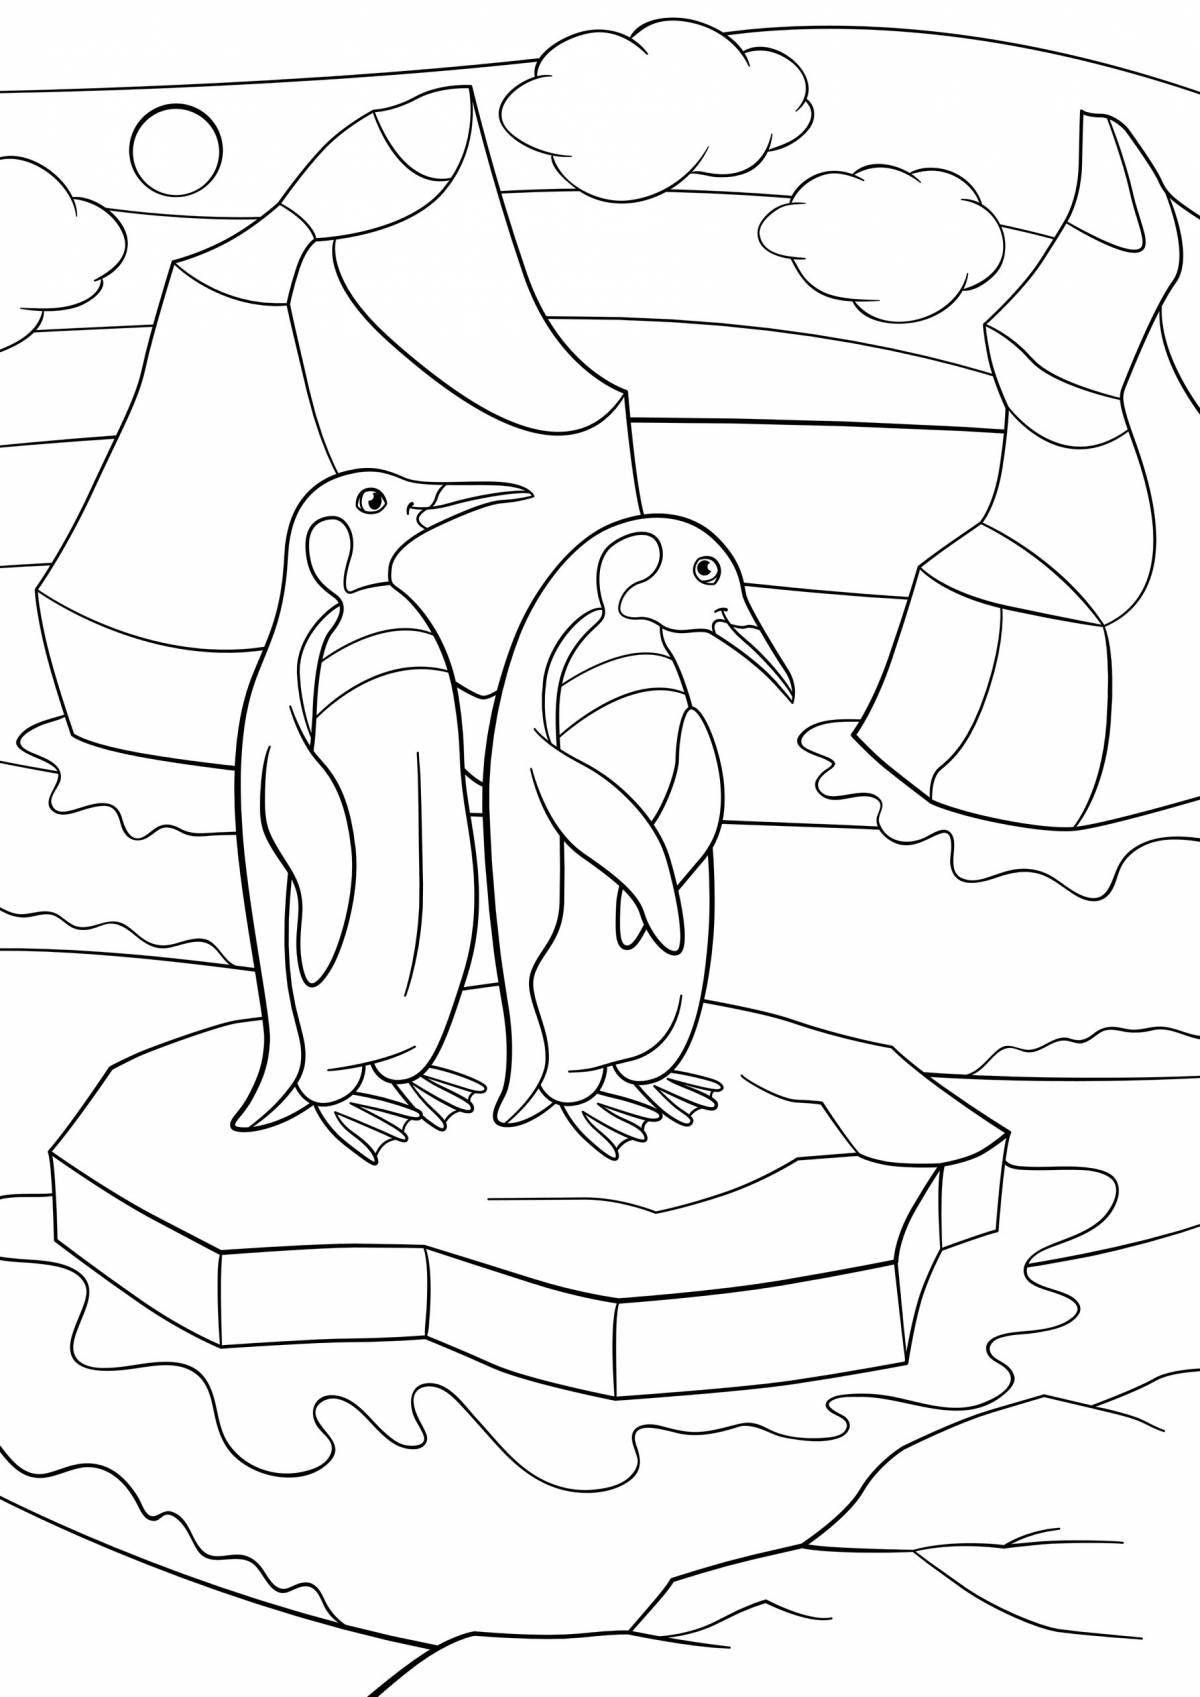 Coloring cute penguin family